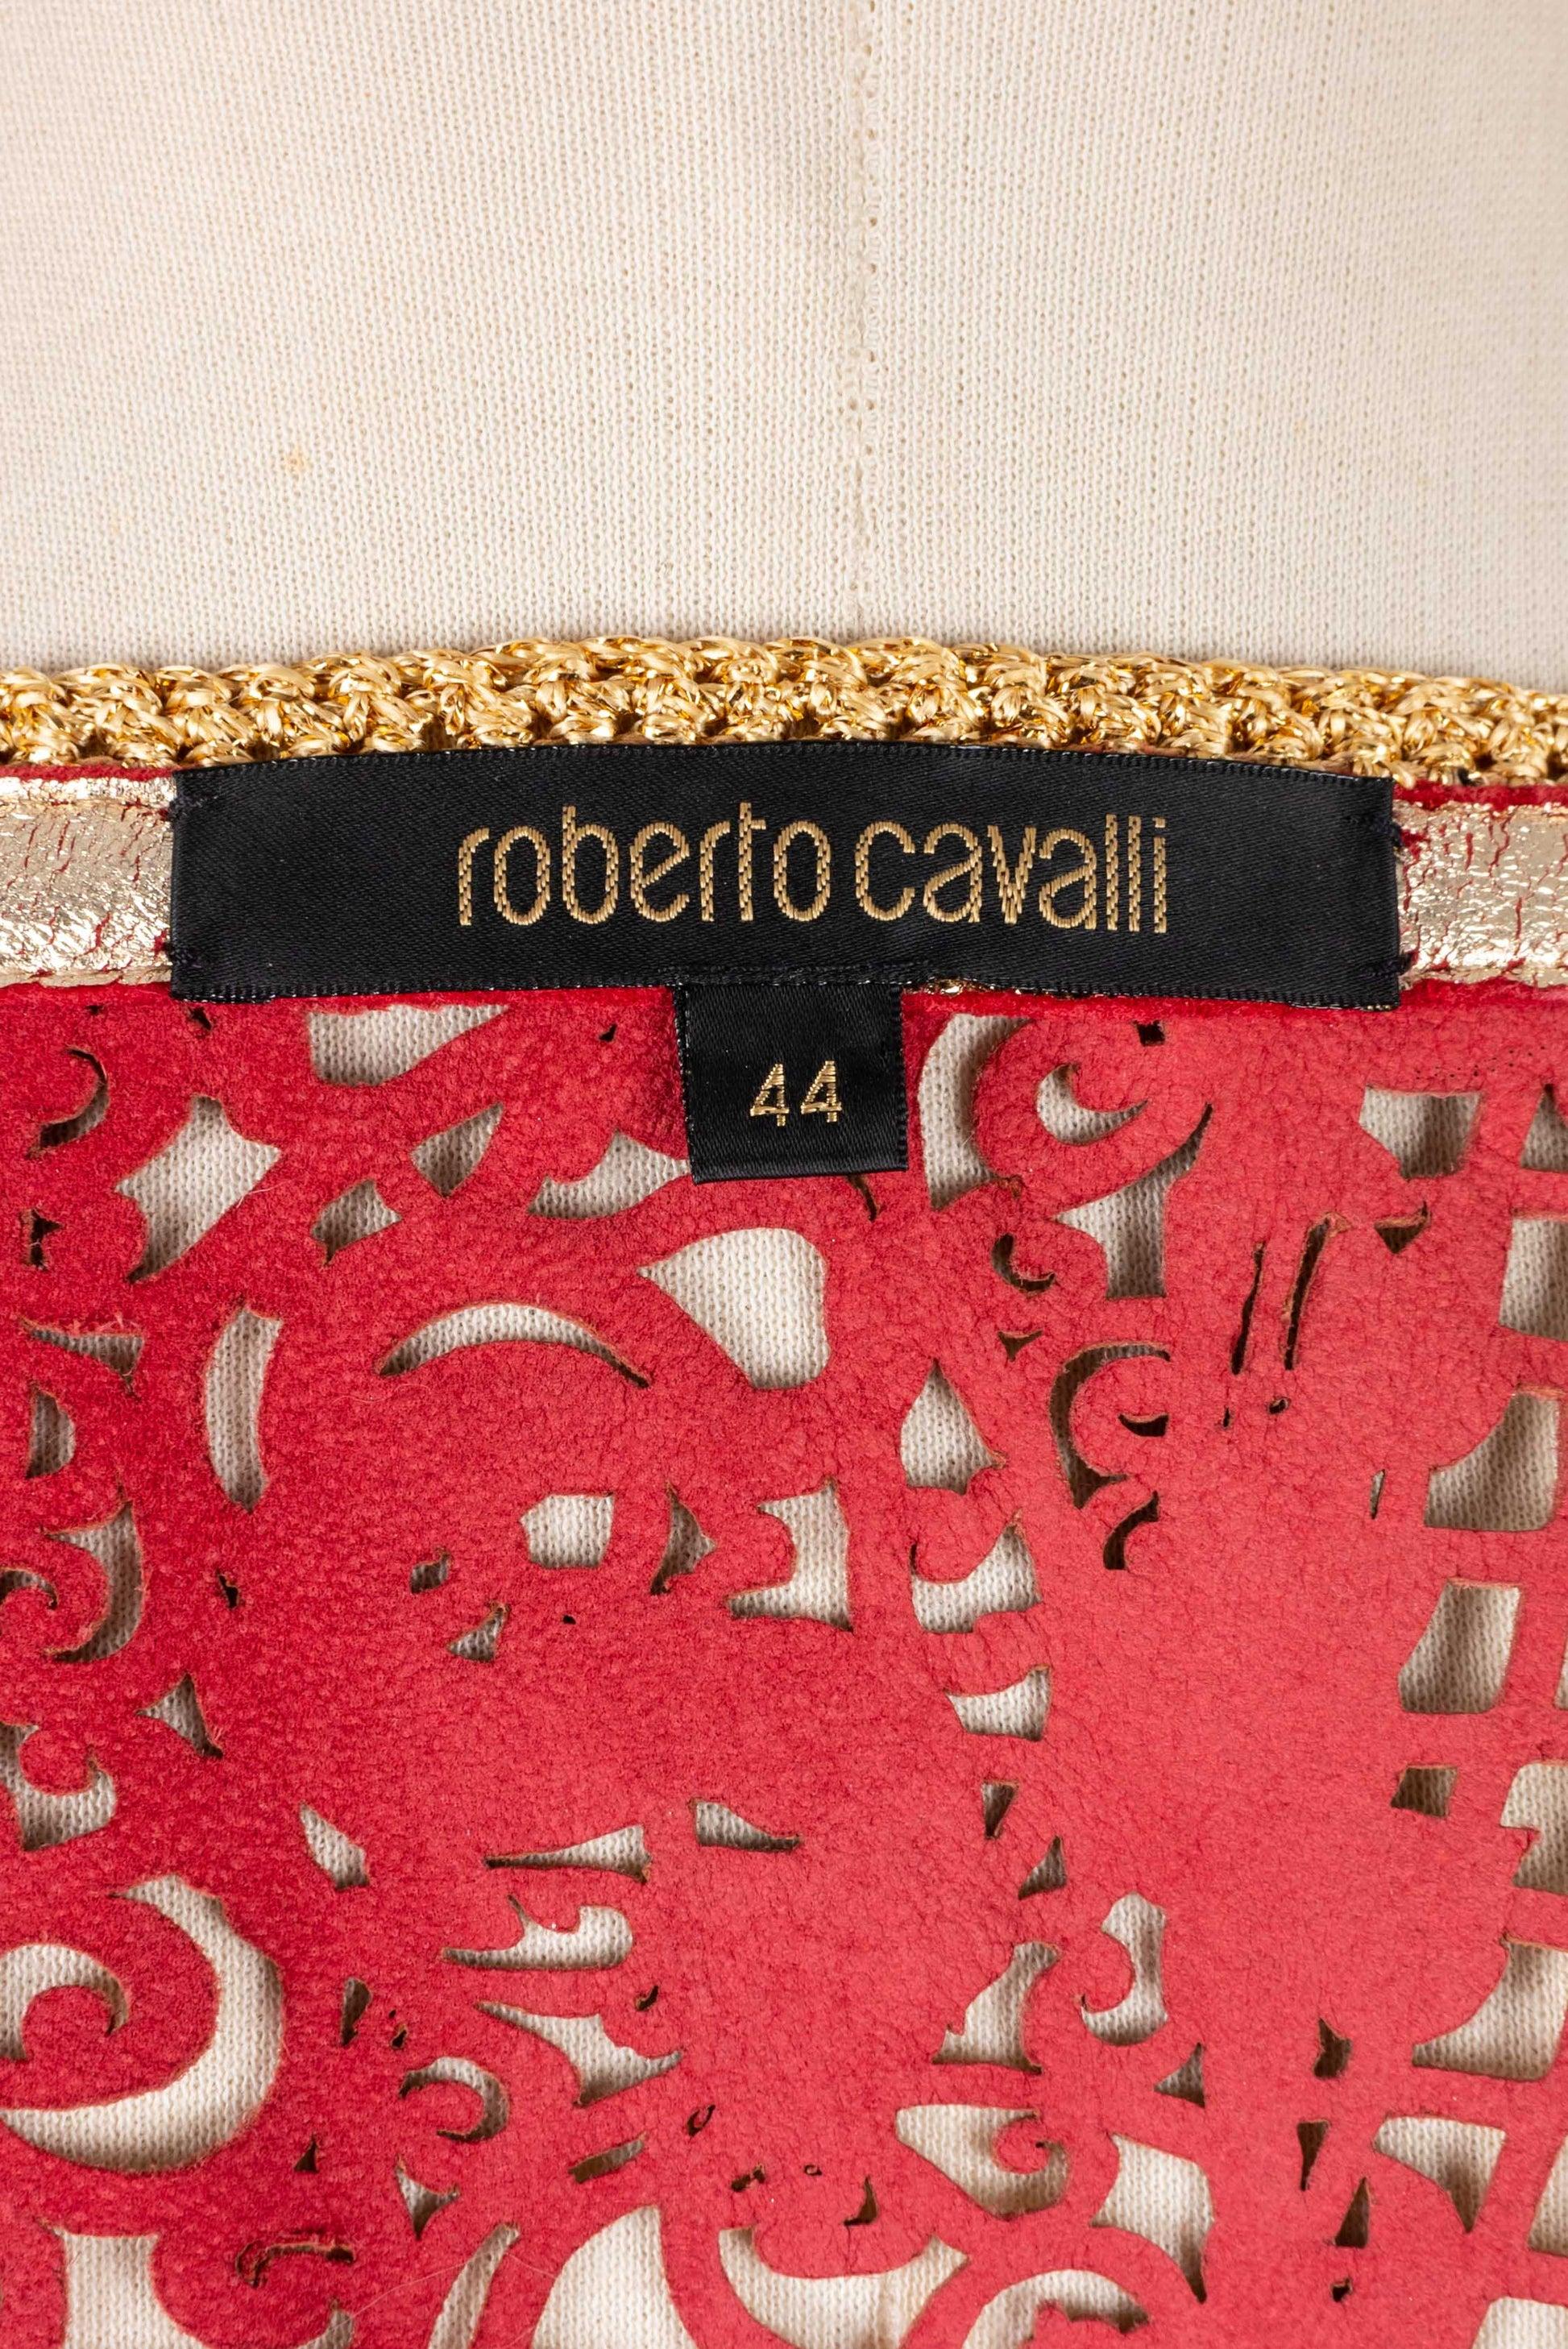 Roberto Cavalli Leather Jacket in Openwork Leather For Sale 4